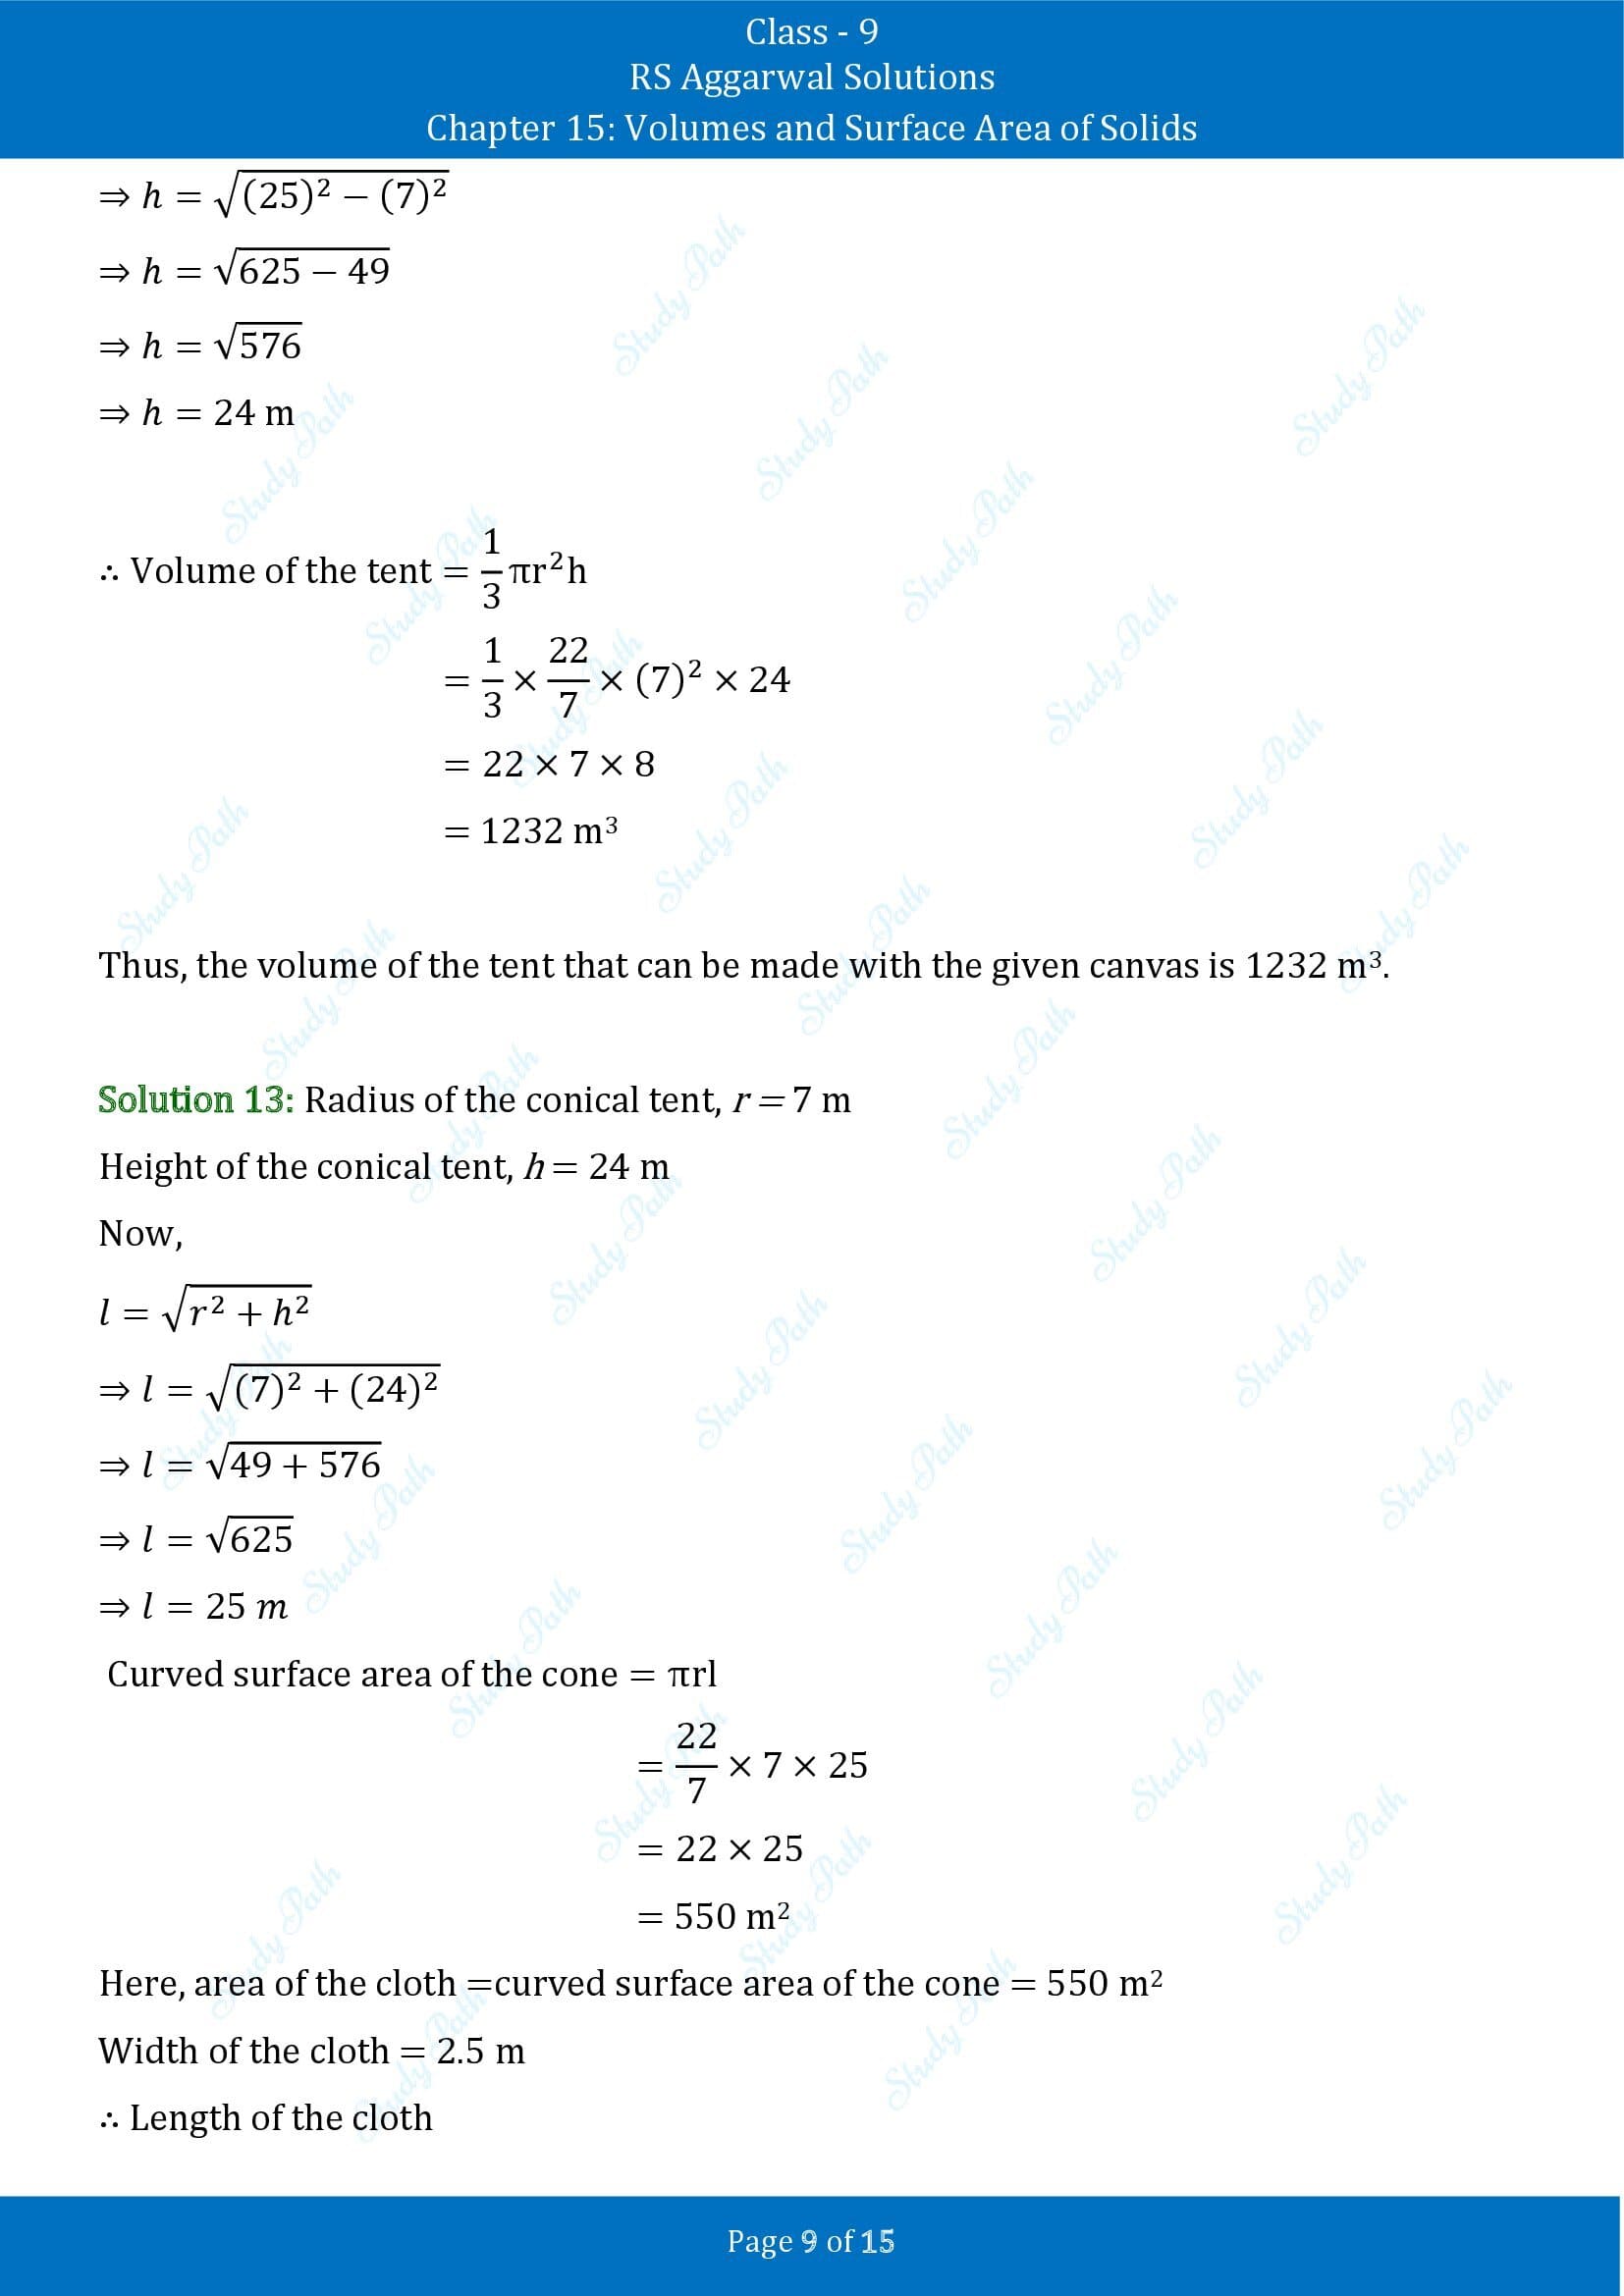 RS Aggarwal Solutions Class 9 Chapter 15 Volumes and Surface Area of Solids Exercise 15C 00009